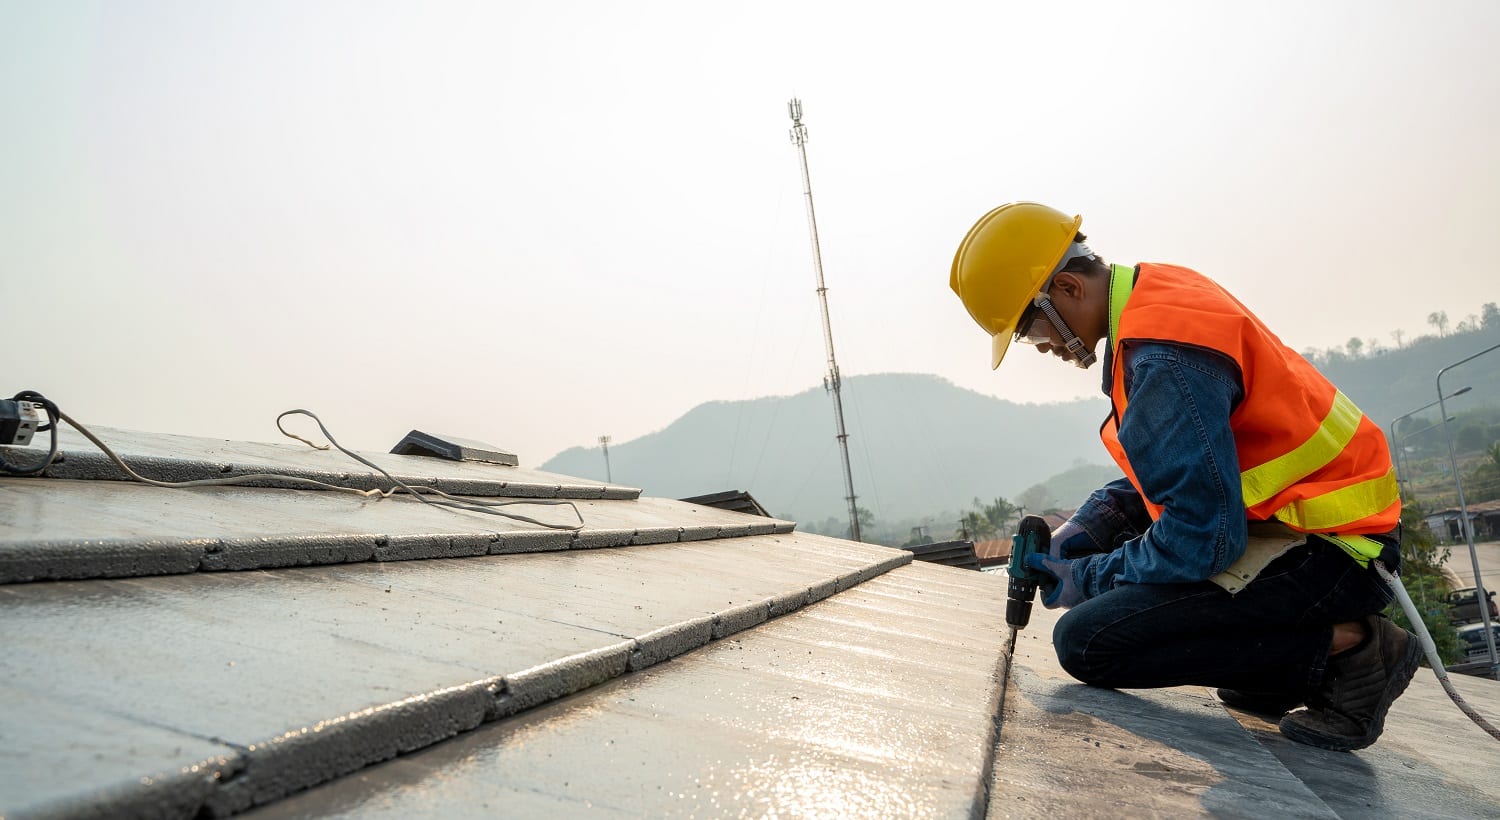 Construction engineer wear safety uniform inspection roofer working on roof structure of building on construction site.